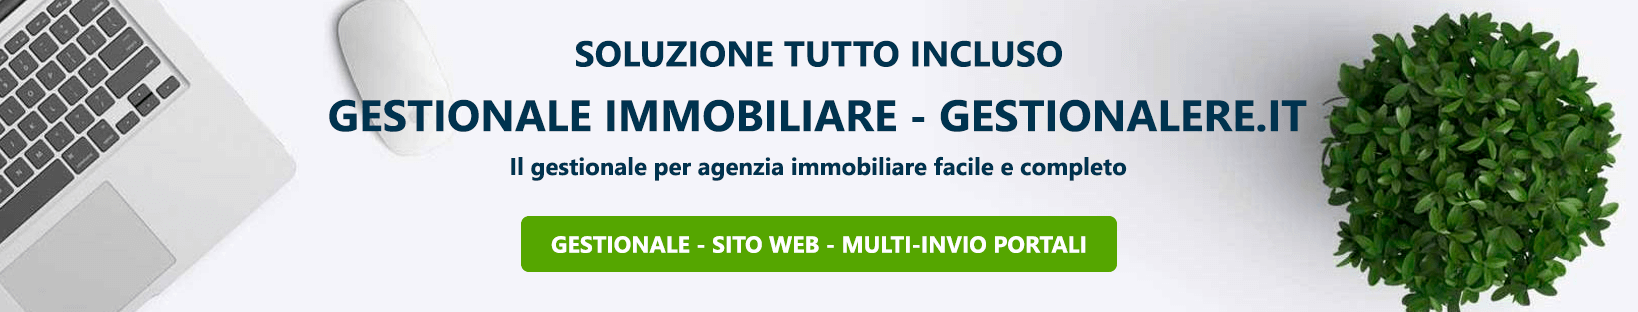 Gestionale immobiliare banner